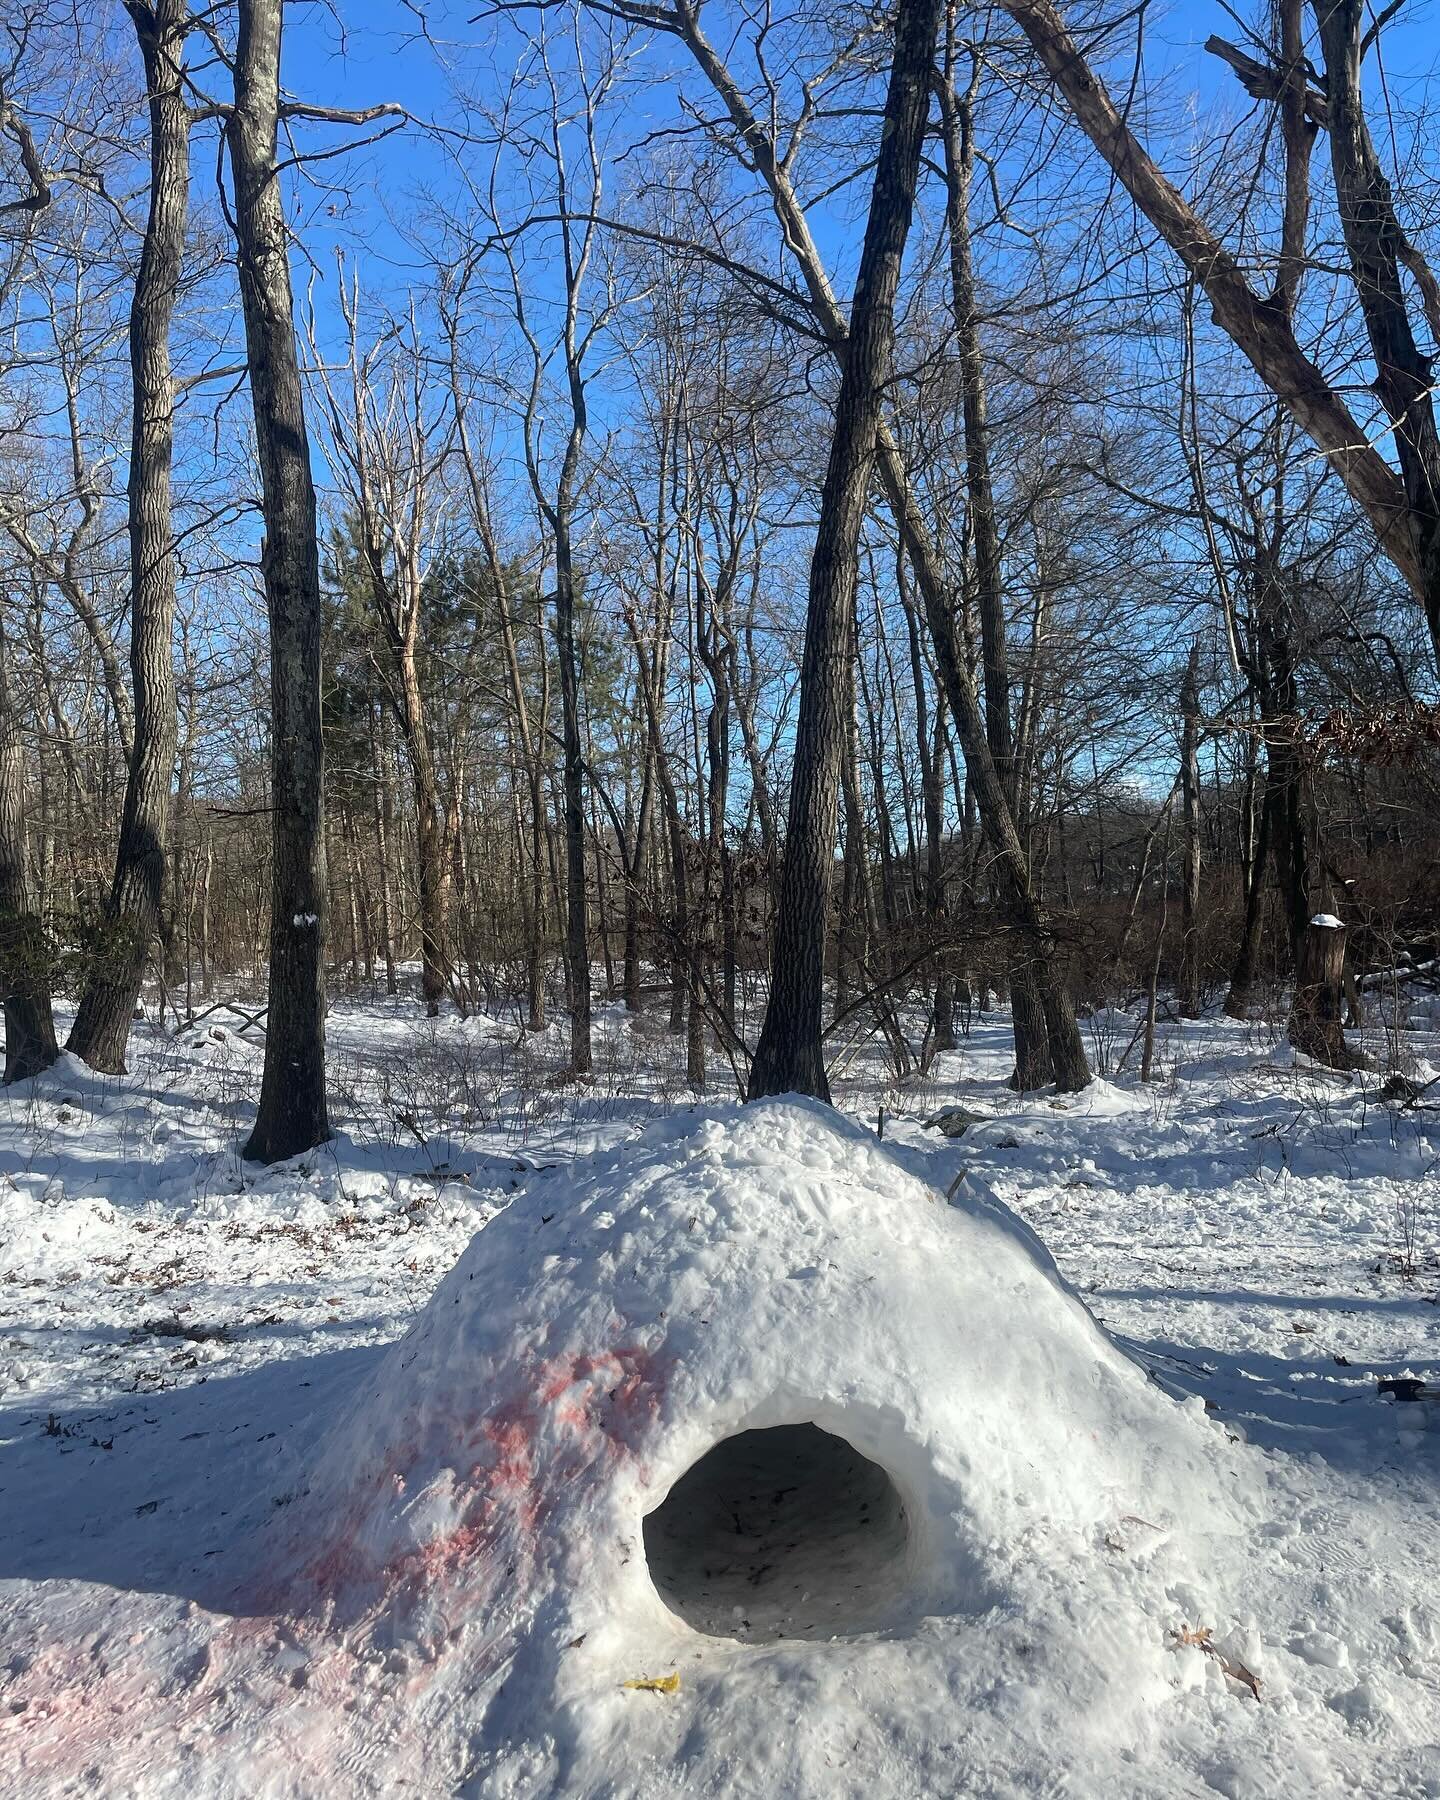 Teen Winter Skills Weekend!
.
Snowy wonders, friction fires, buckskin sewing projects, primitive trapping, tracking, gait studies, and so much more - all polished up with laughter and comradery ! 
.
Learning the ways of the winter together was such a